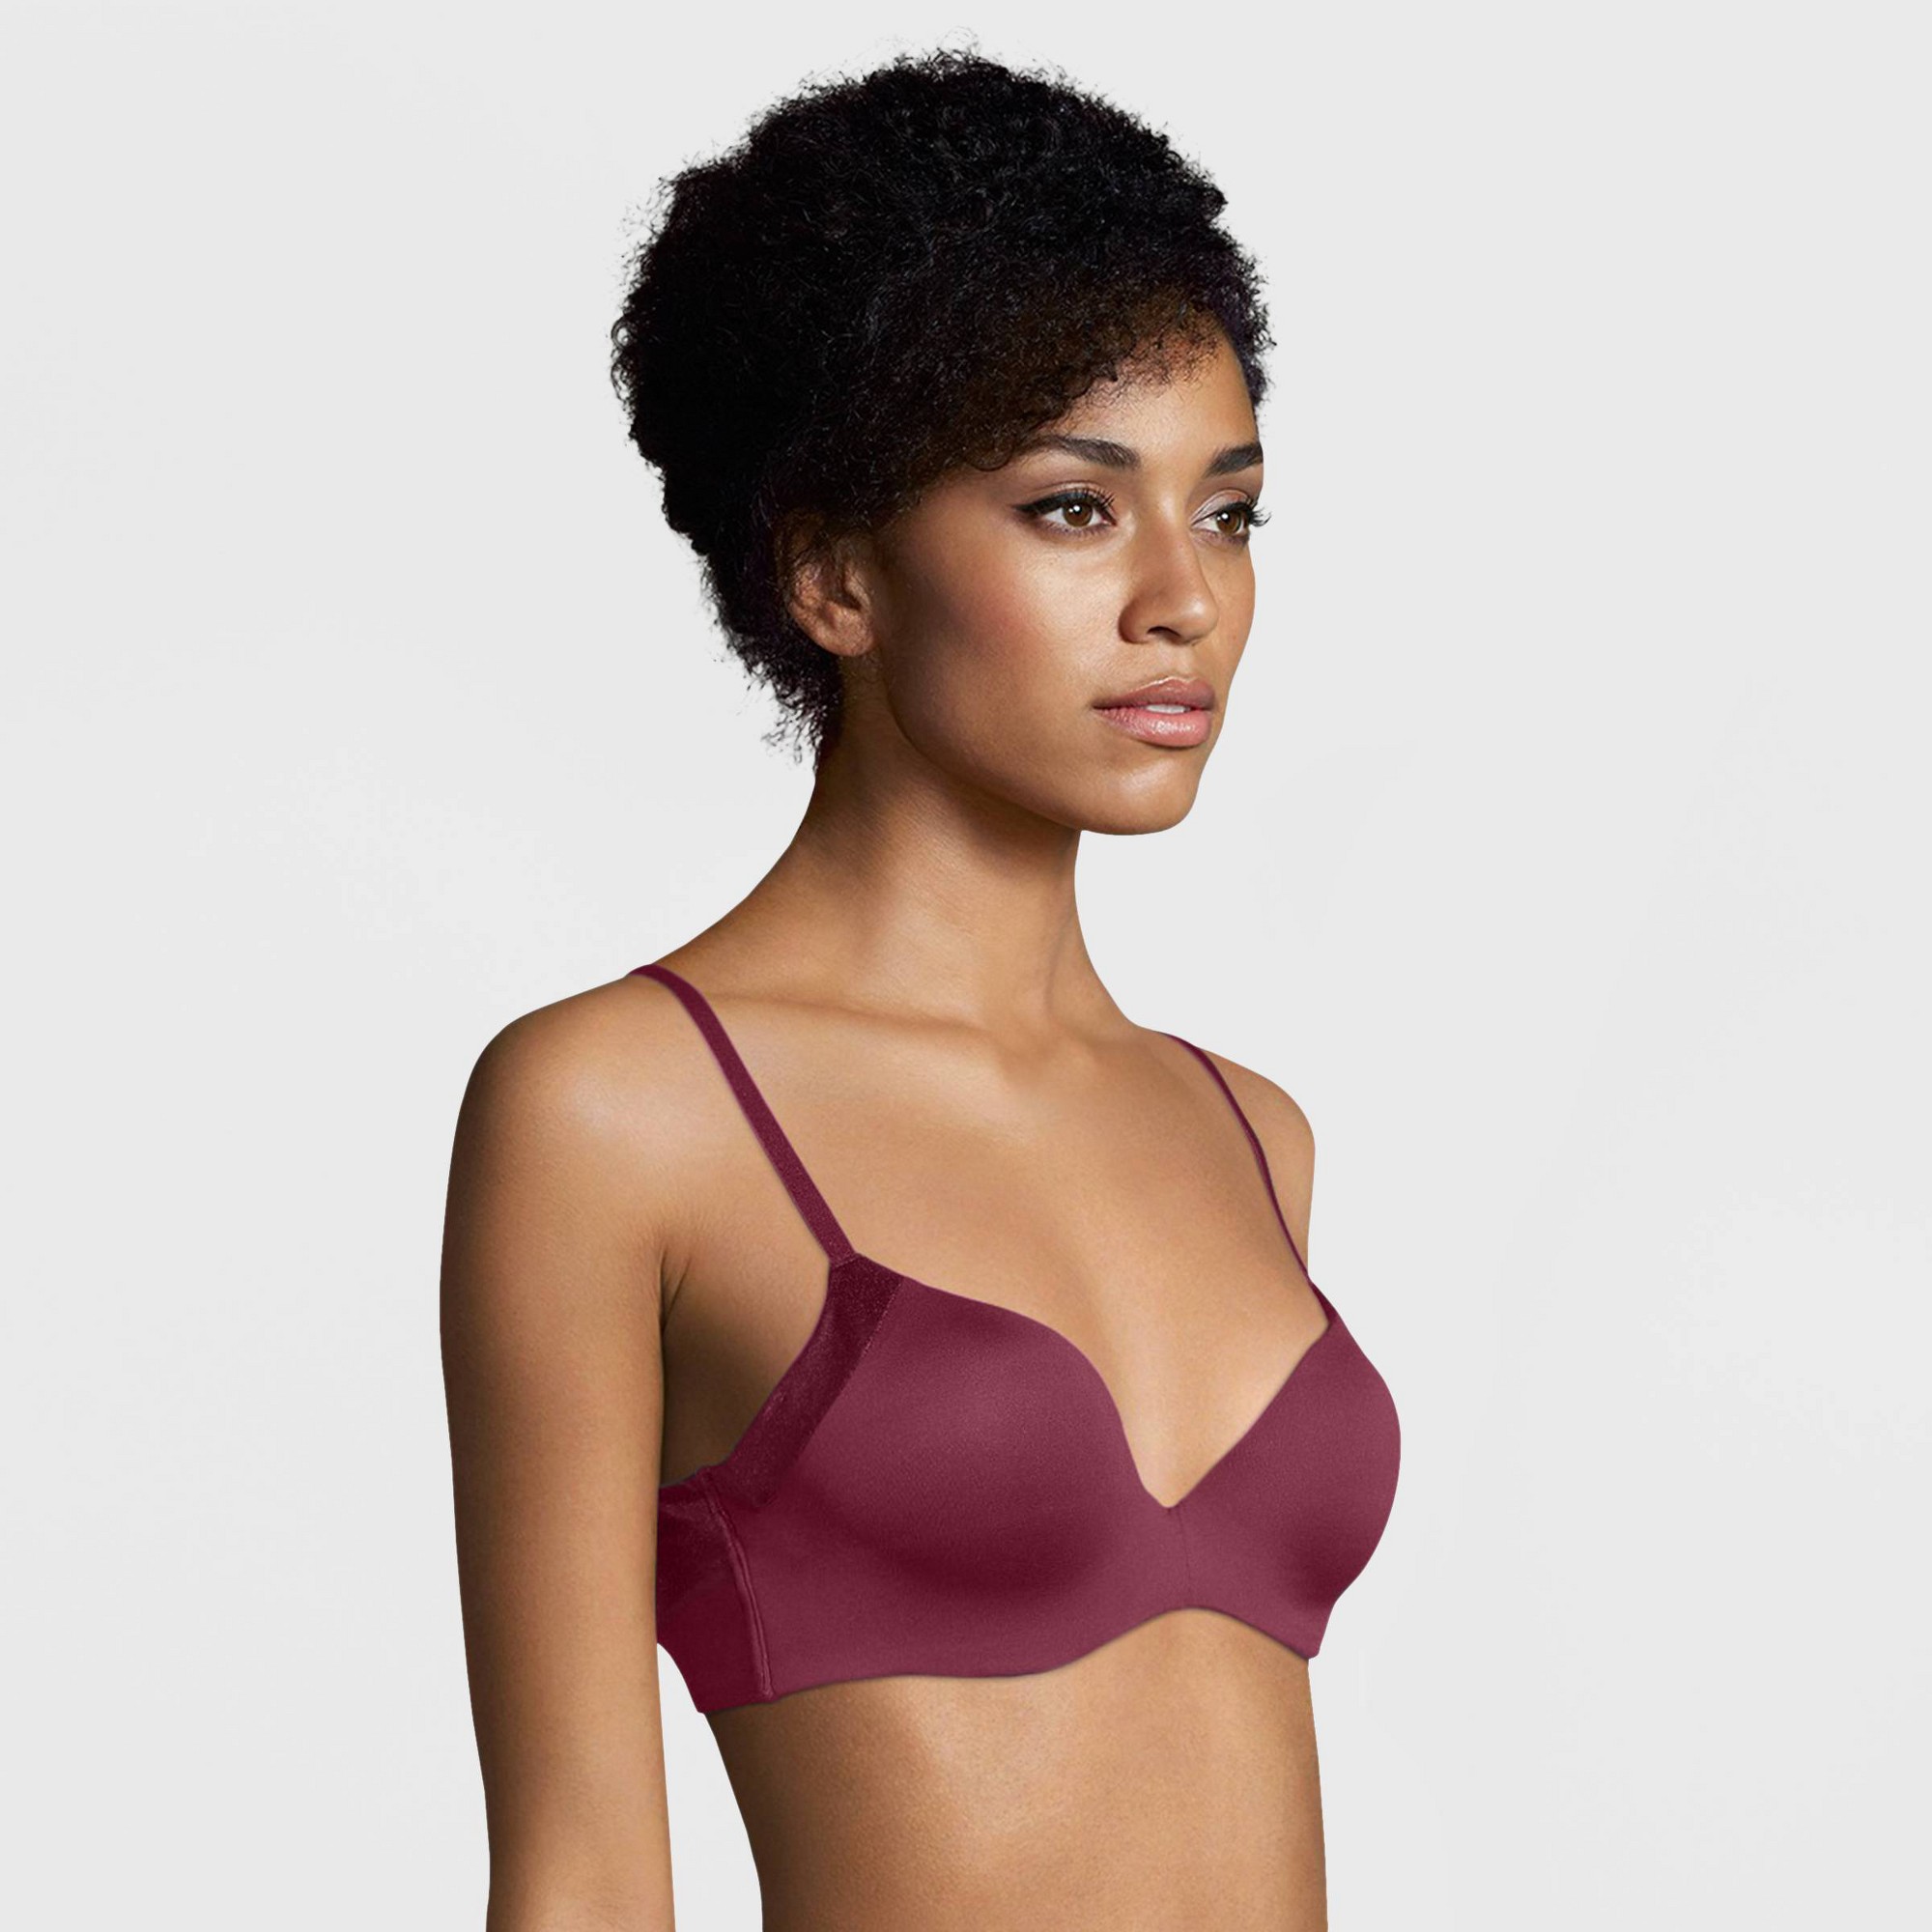 Maidenform Self Expressions Women's Smooth Finish Push-Up Bra